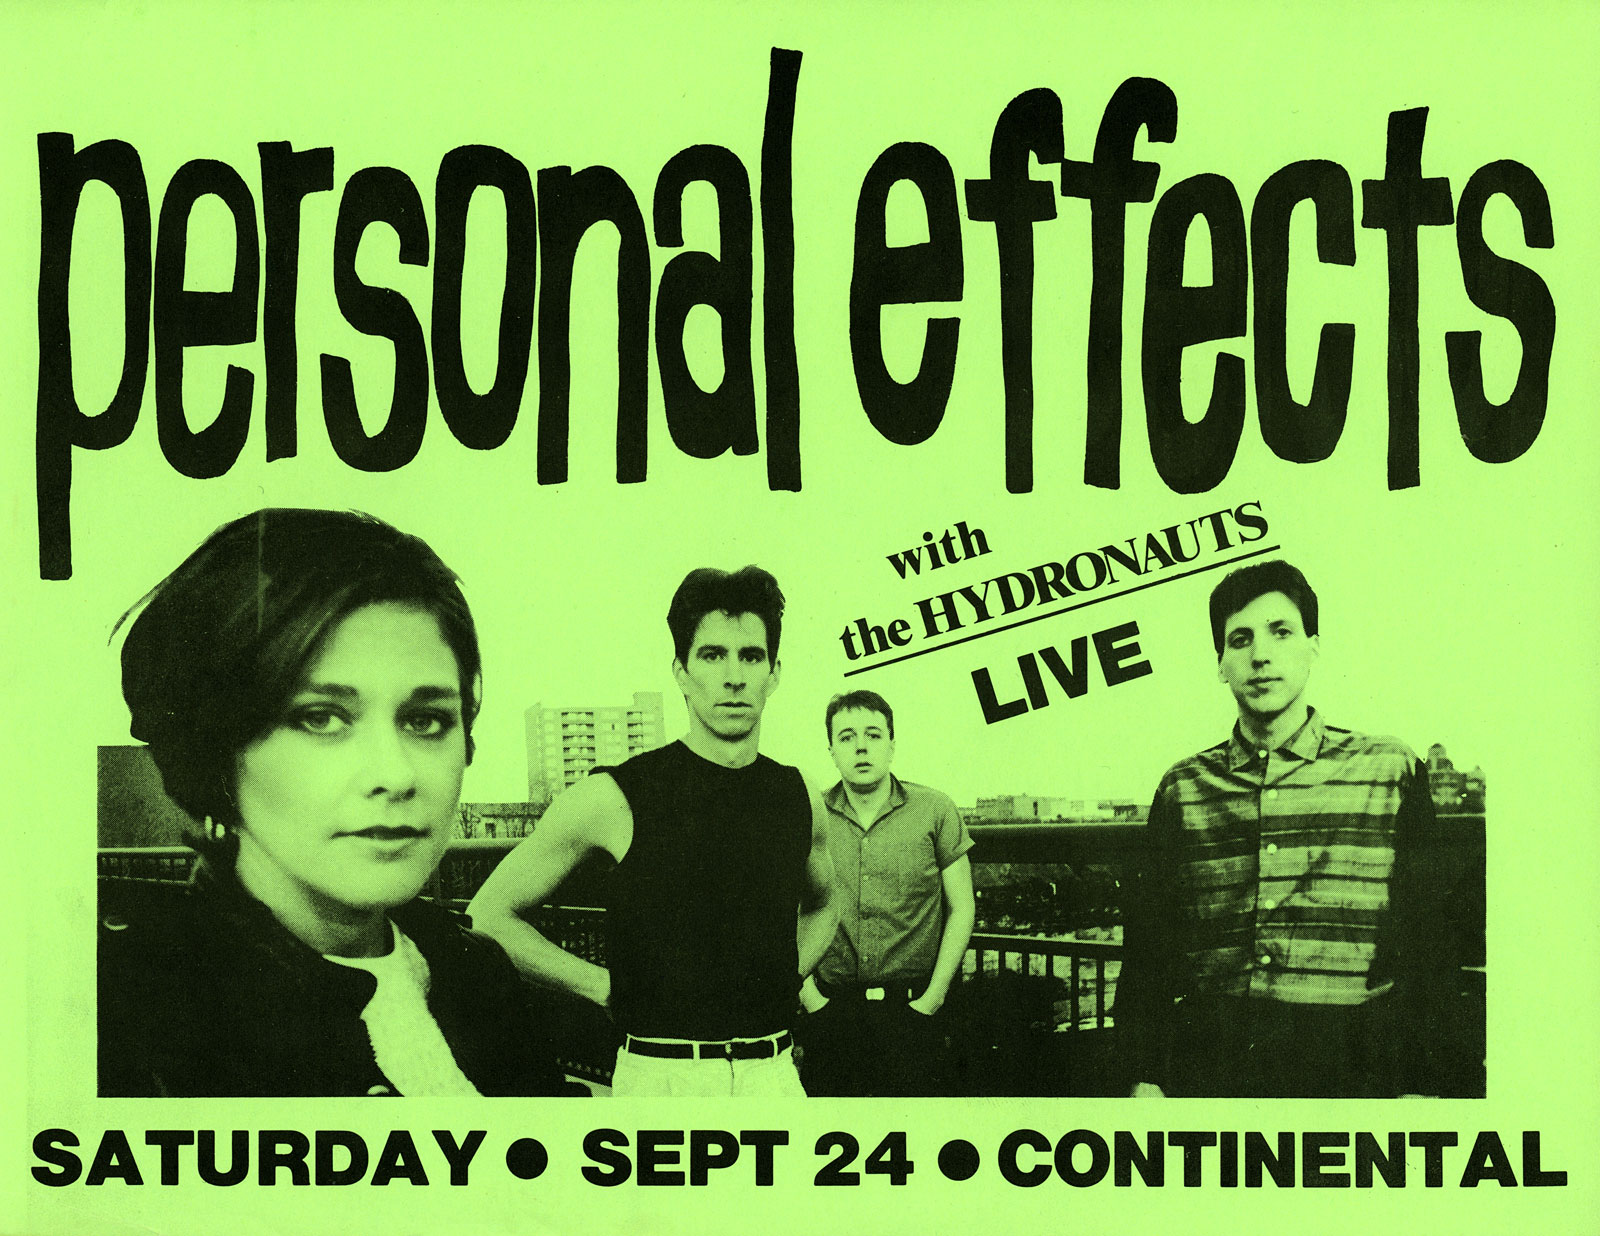 Poster for Personal Effects at The Continental in Buffalo New York with The Hydronauts on 09.24.1983